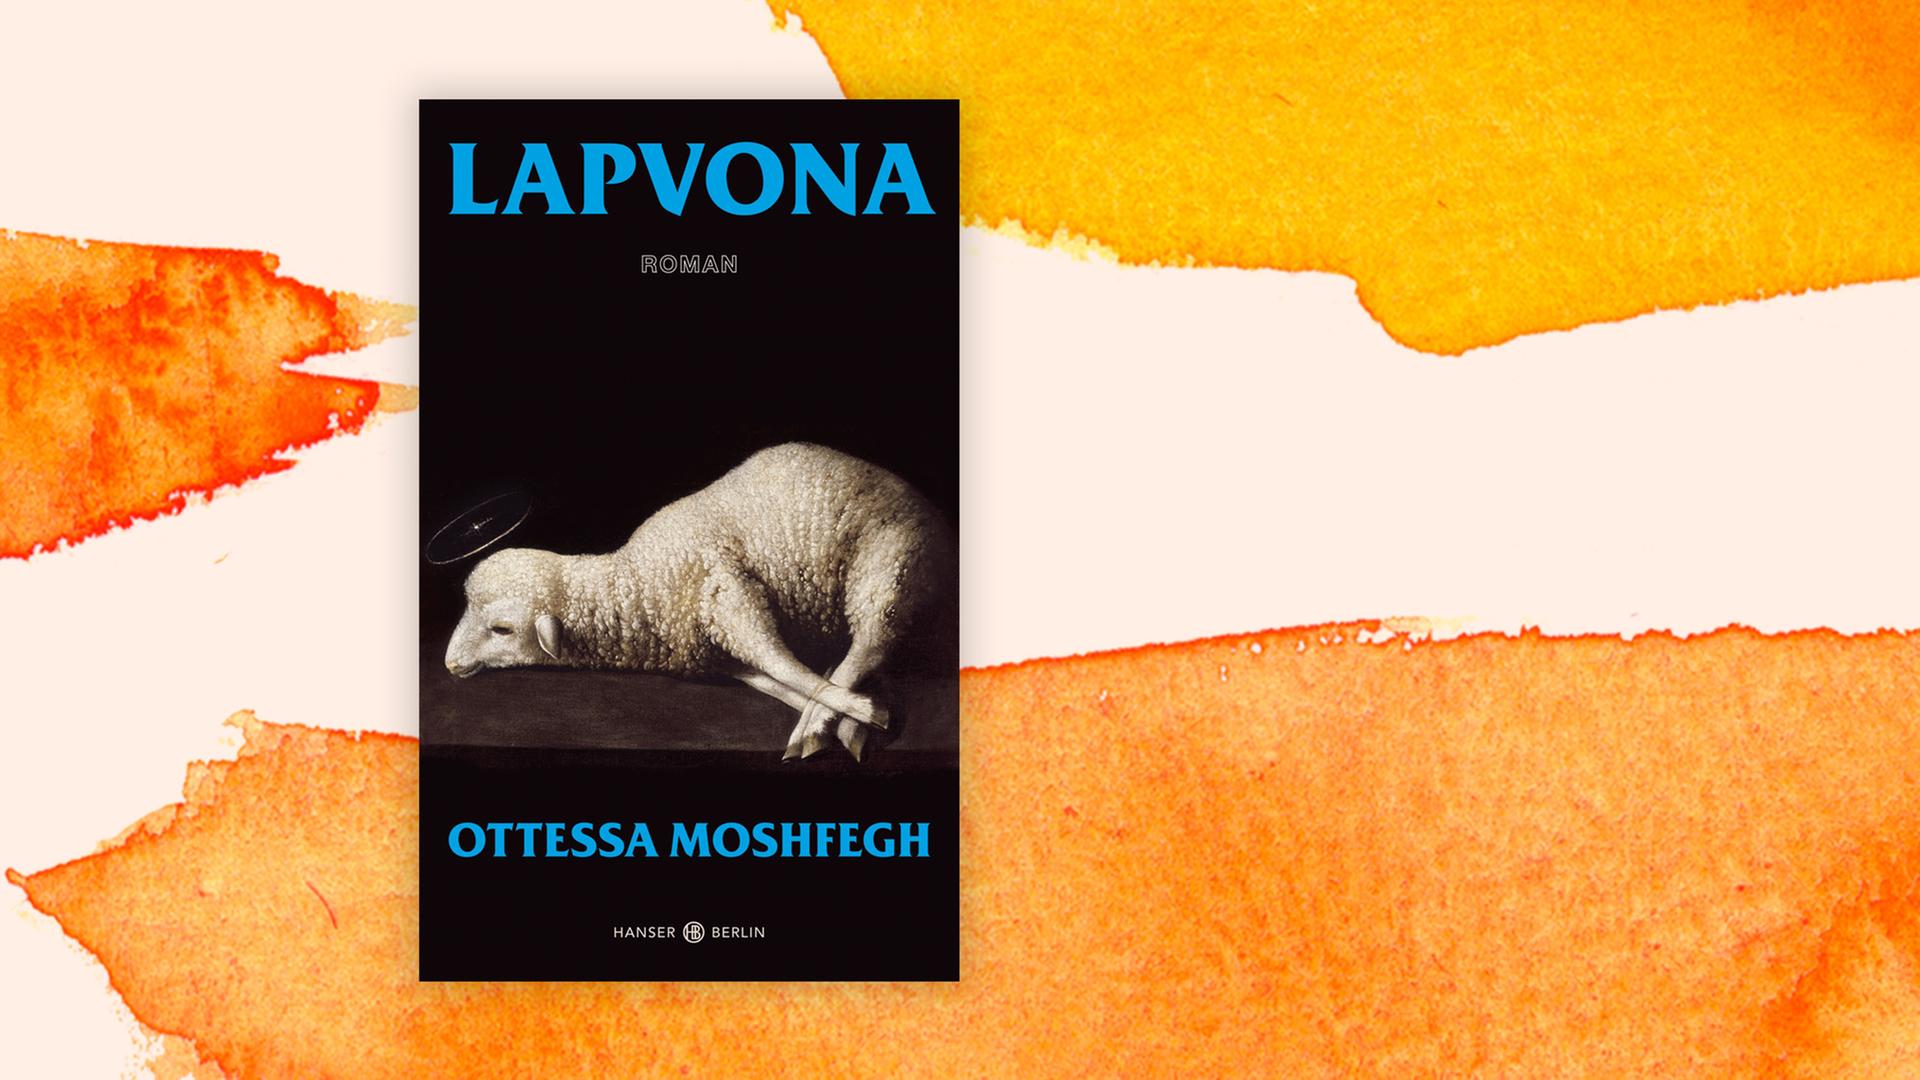 Ottessa Moshfegh: “Lapvona” – she rules harshly and energetically